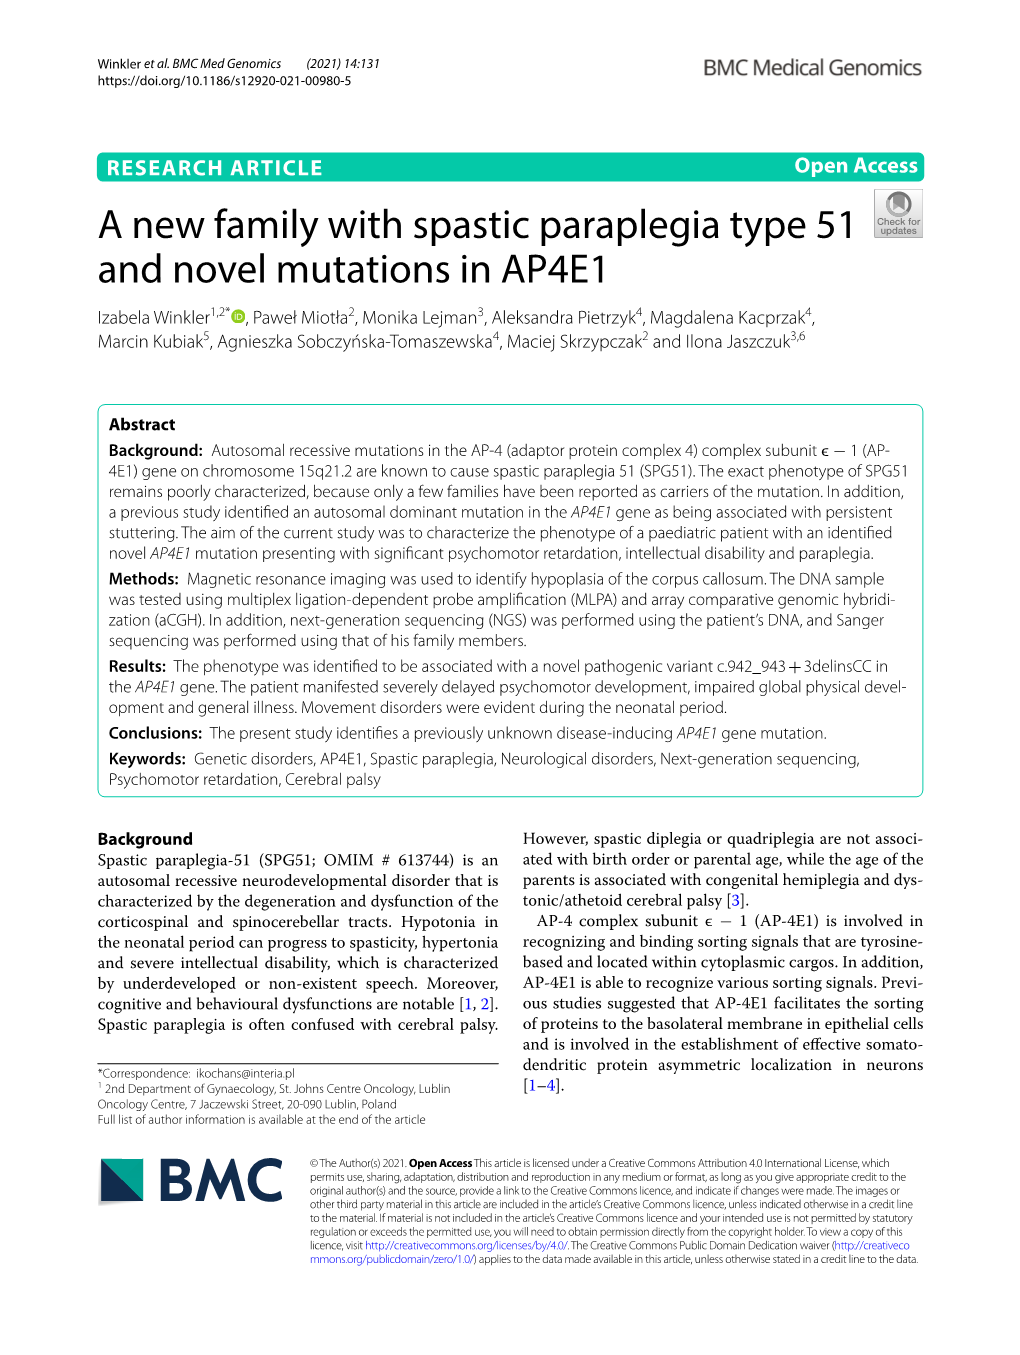 A New Family with Spastic Paraplegia Type 51 and Novel Mutations in AP4E1